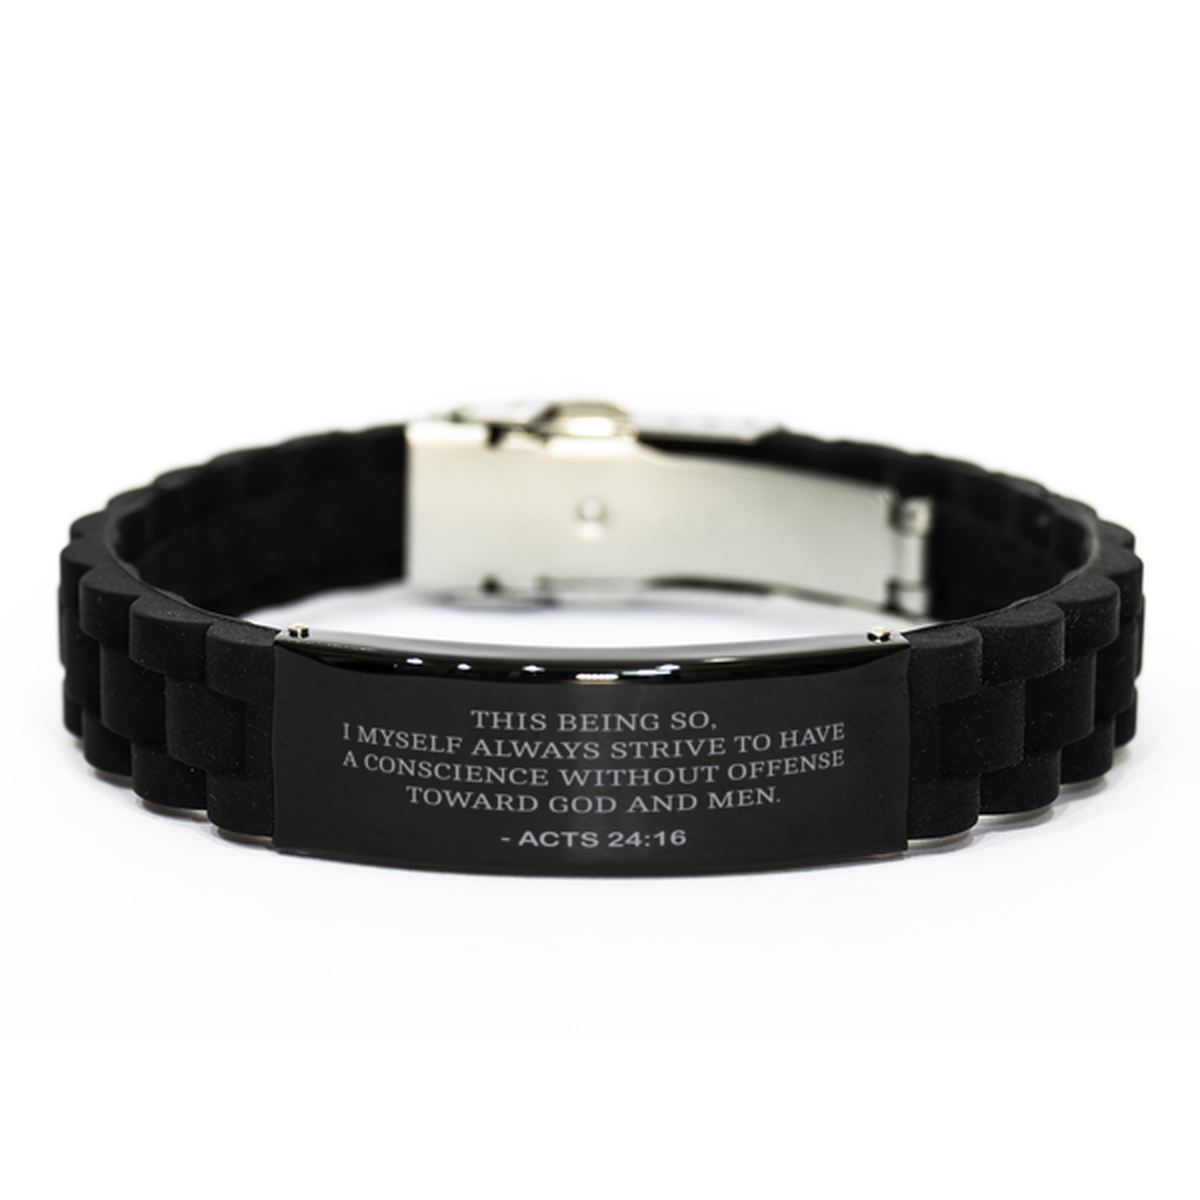 Bible Verse Black Bracelet,, Acts 24:16 This Being So, I Myself Always Strive To Have A, Inspirational Christian Gifts For Men Women